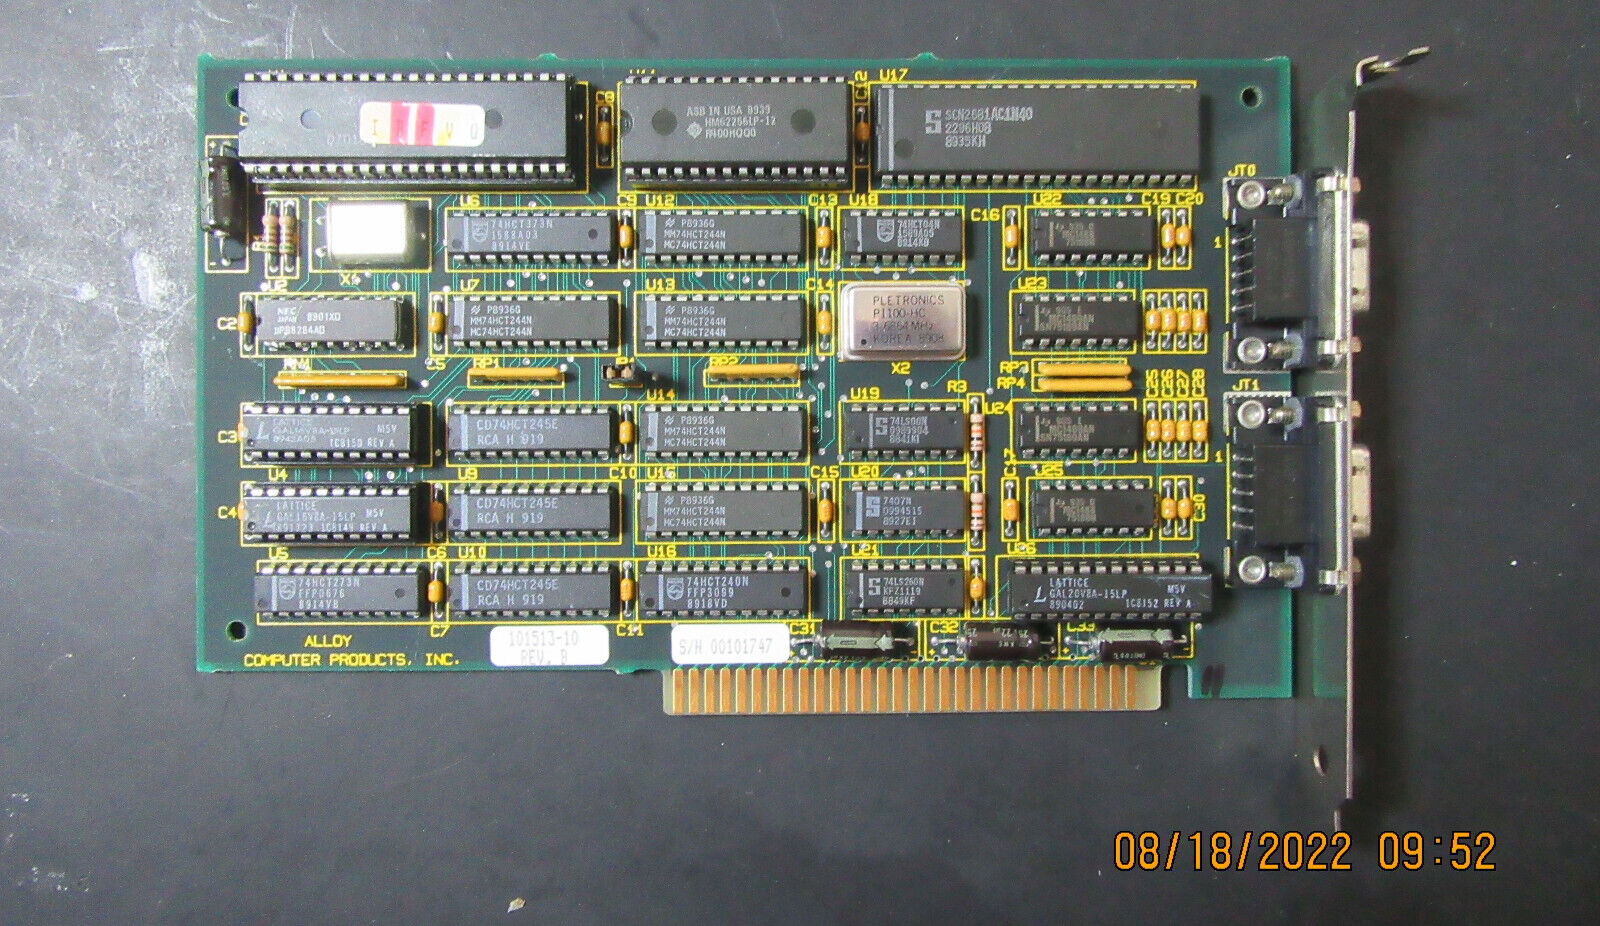 Genuine Vintage Rare Alloy Computer Products 101513-10 Rev. B 8-bit ISA Card